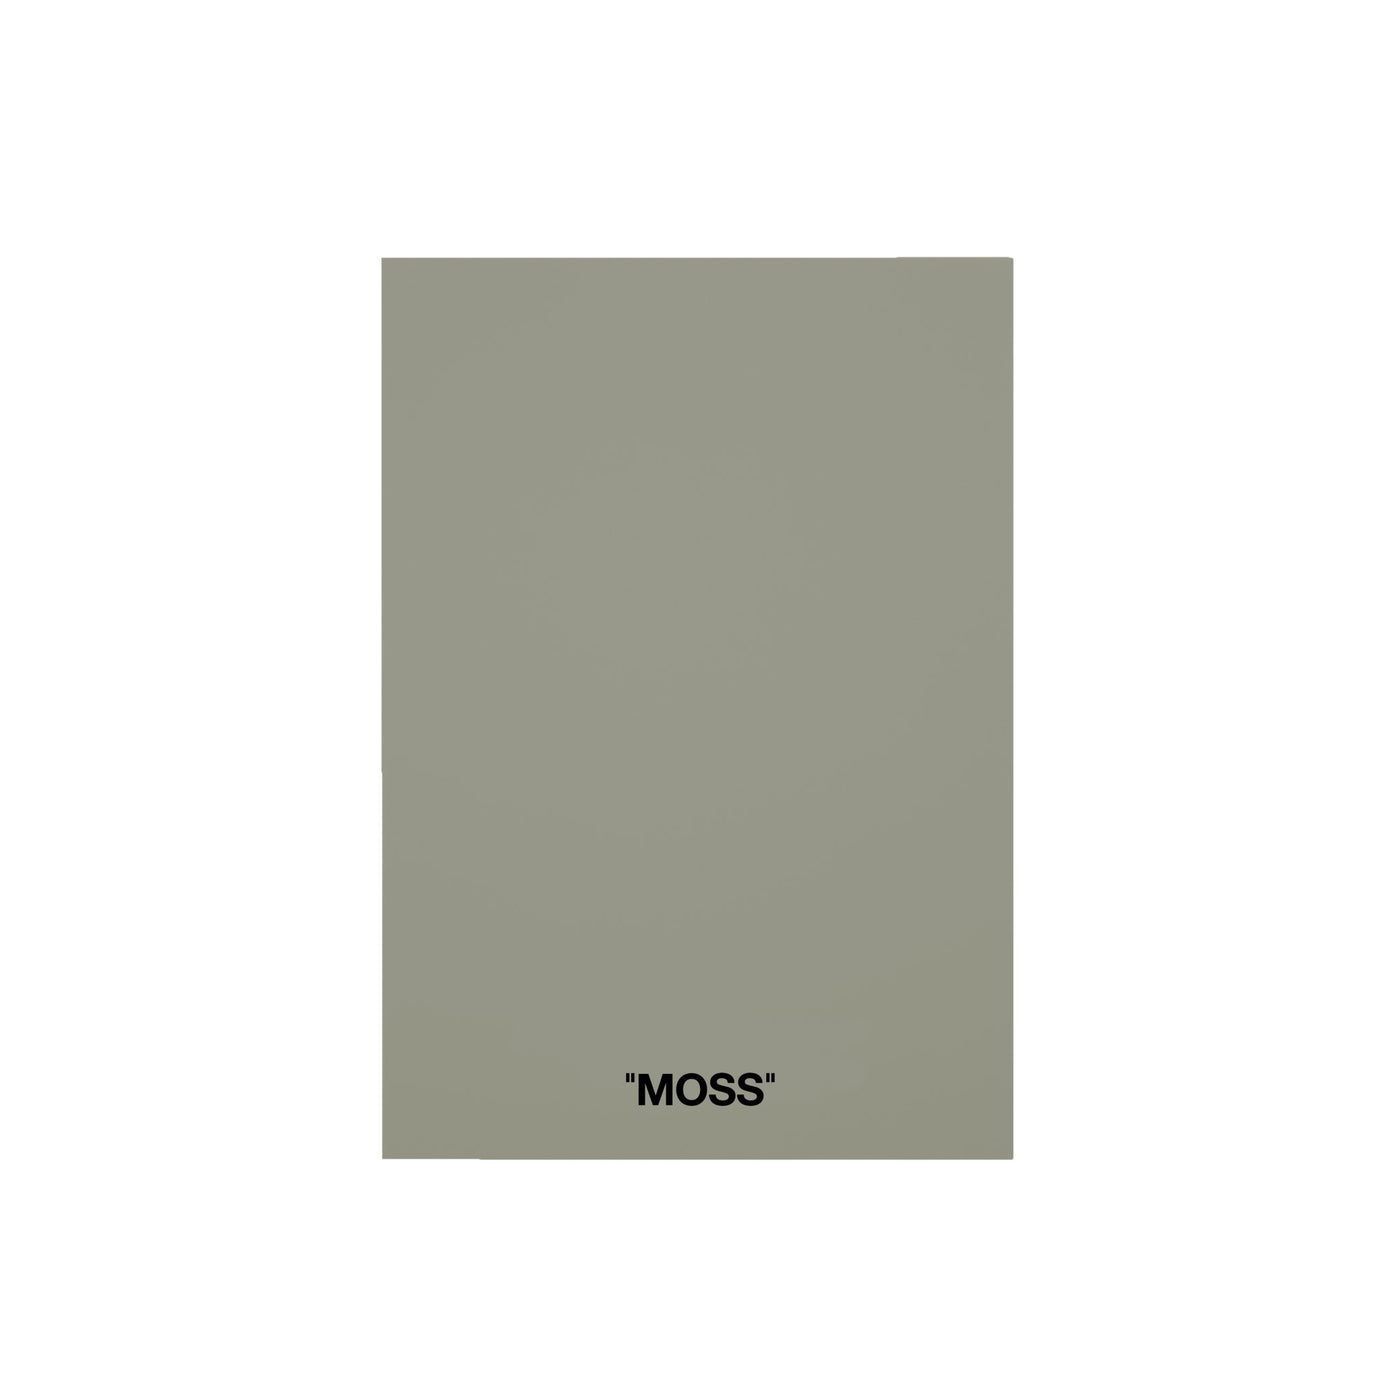 Color Card - Moss - SHADES by Eric Kuster